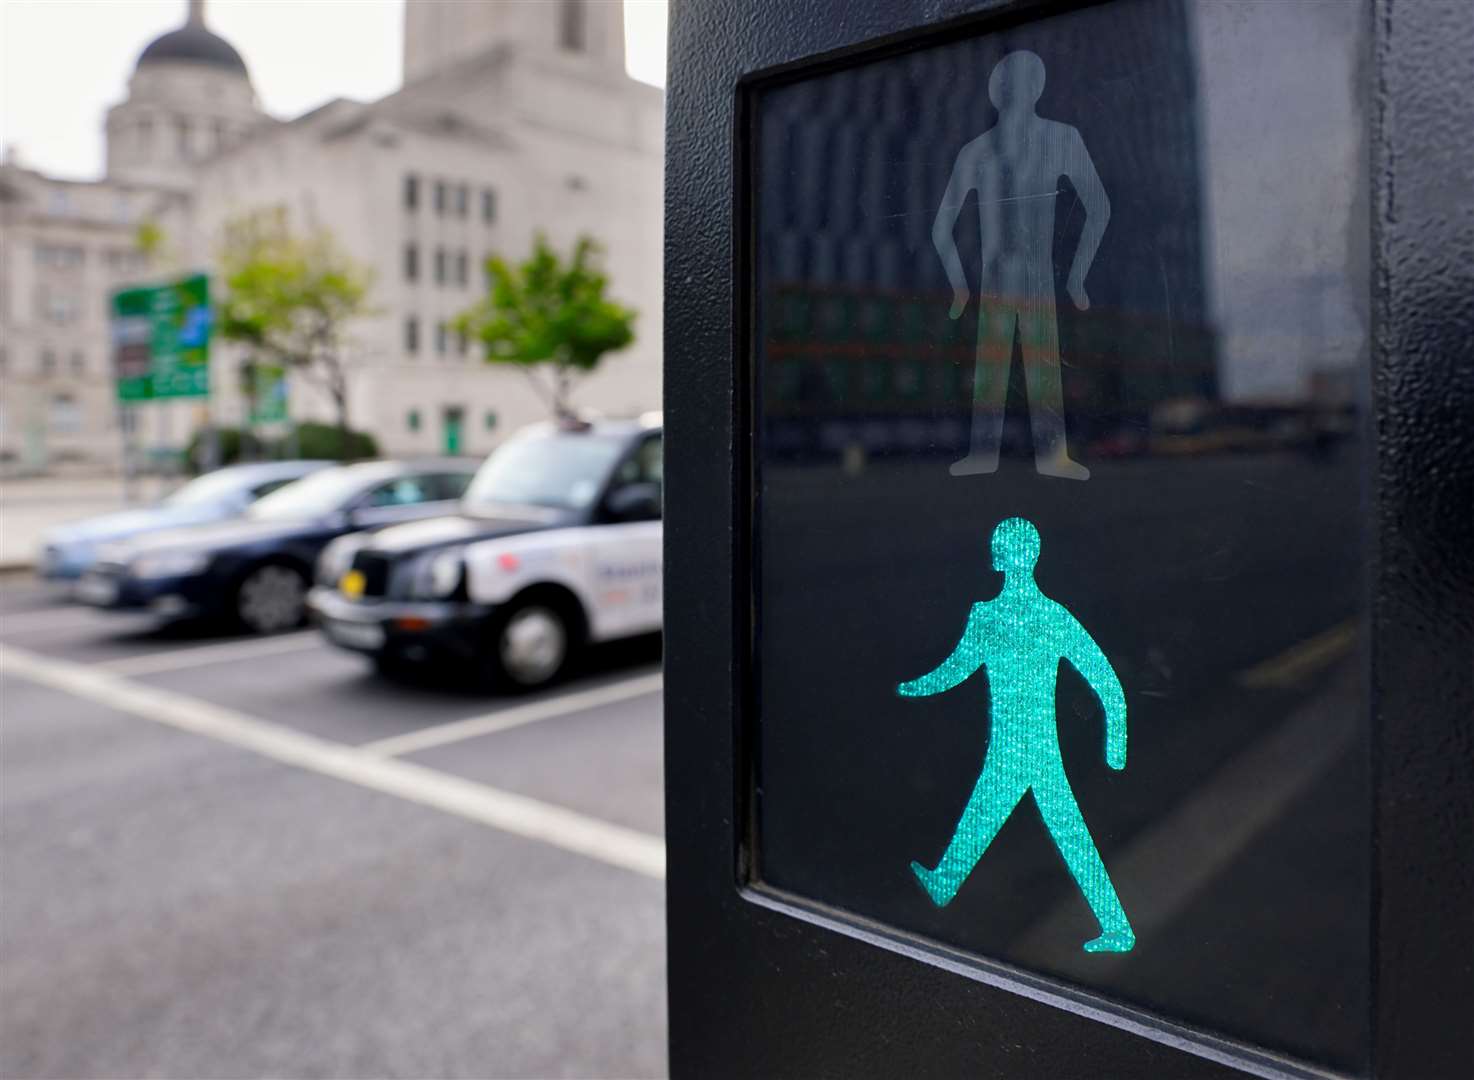 The green man could be let for longer in response to our slower walking times. Image: iStock.